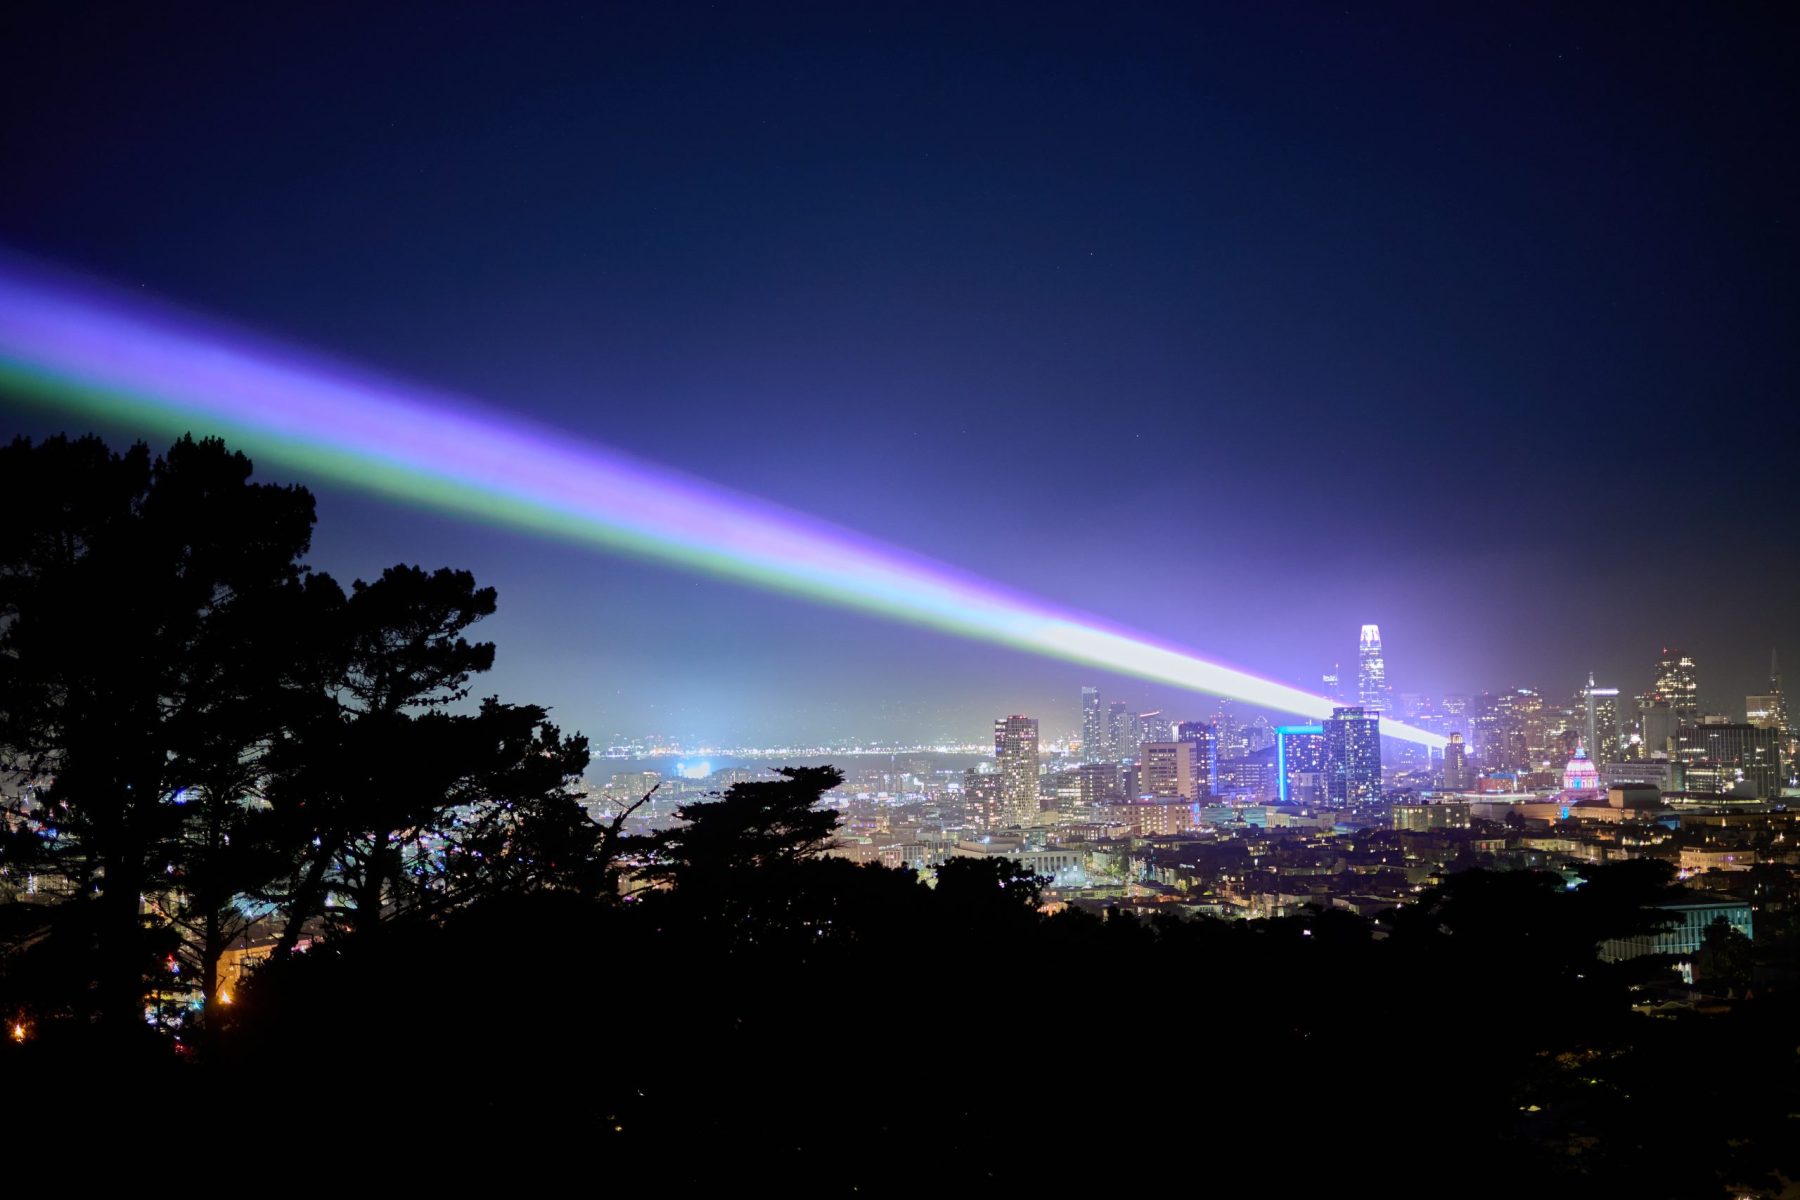 Lasers beaming from the San Francisco skyline into the night sky